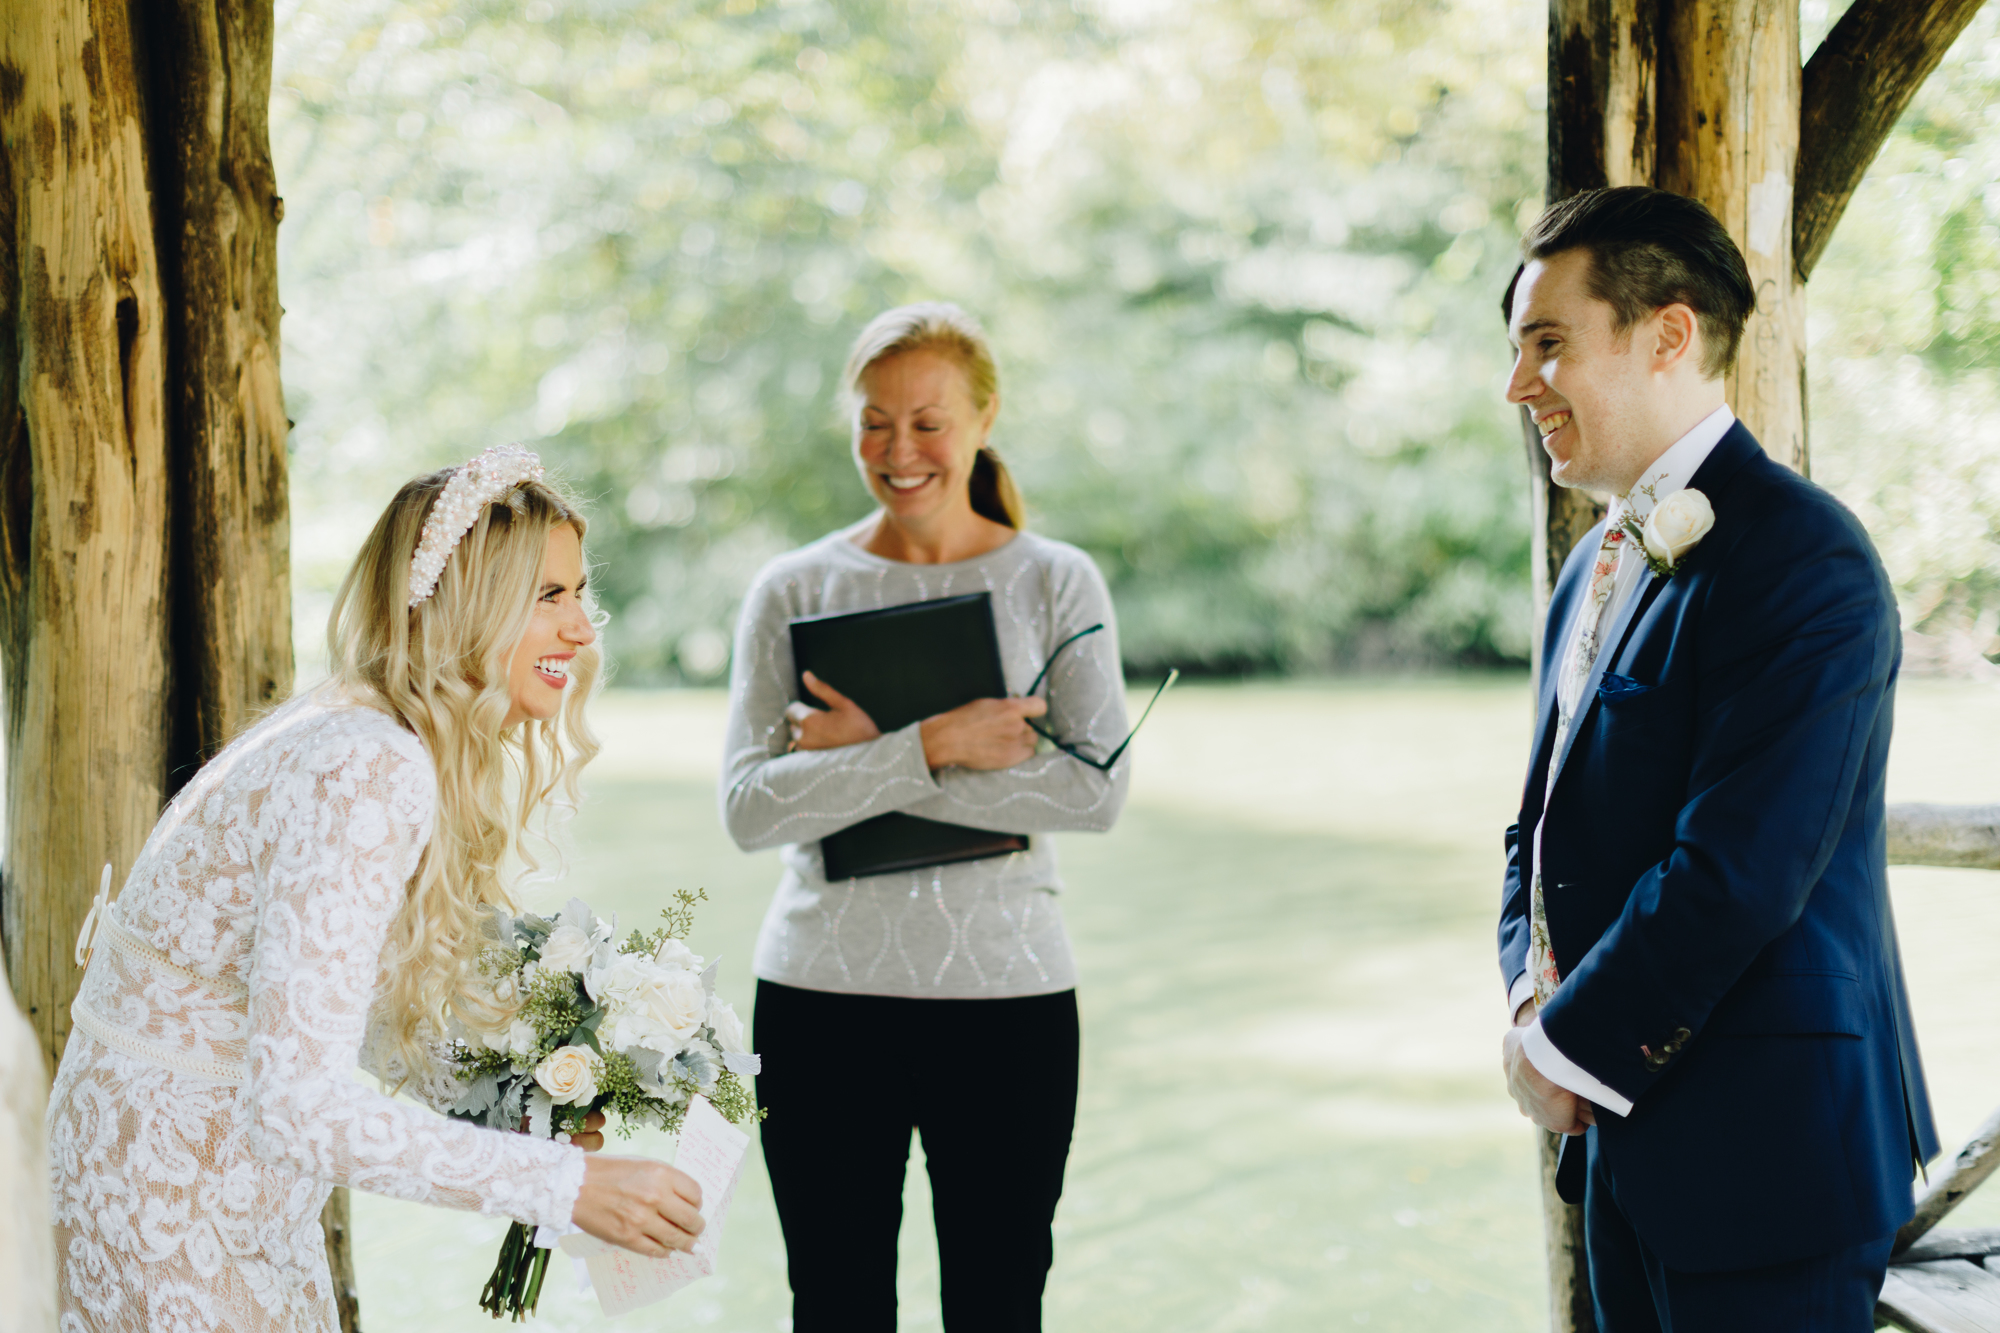 Beautiful Wagner Cove Elopement in Central Park